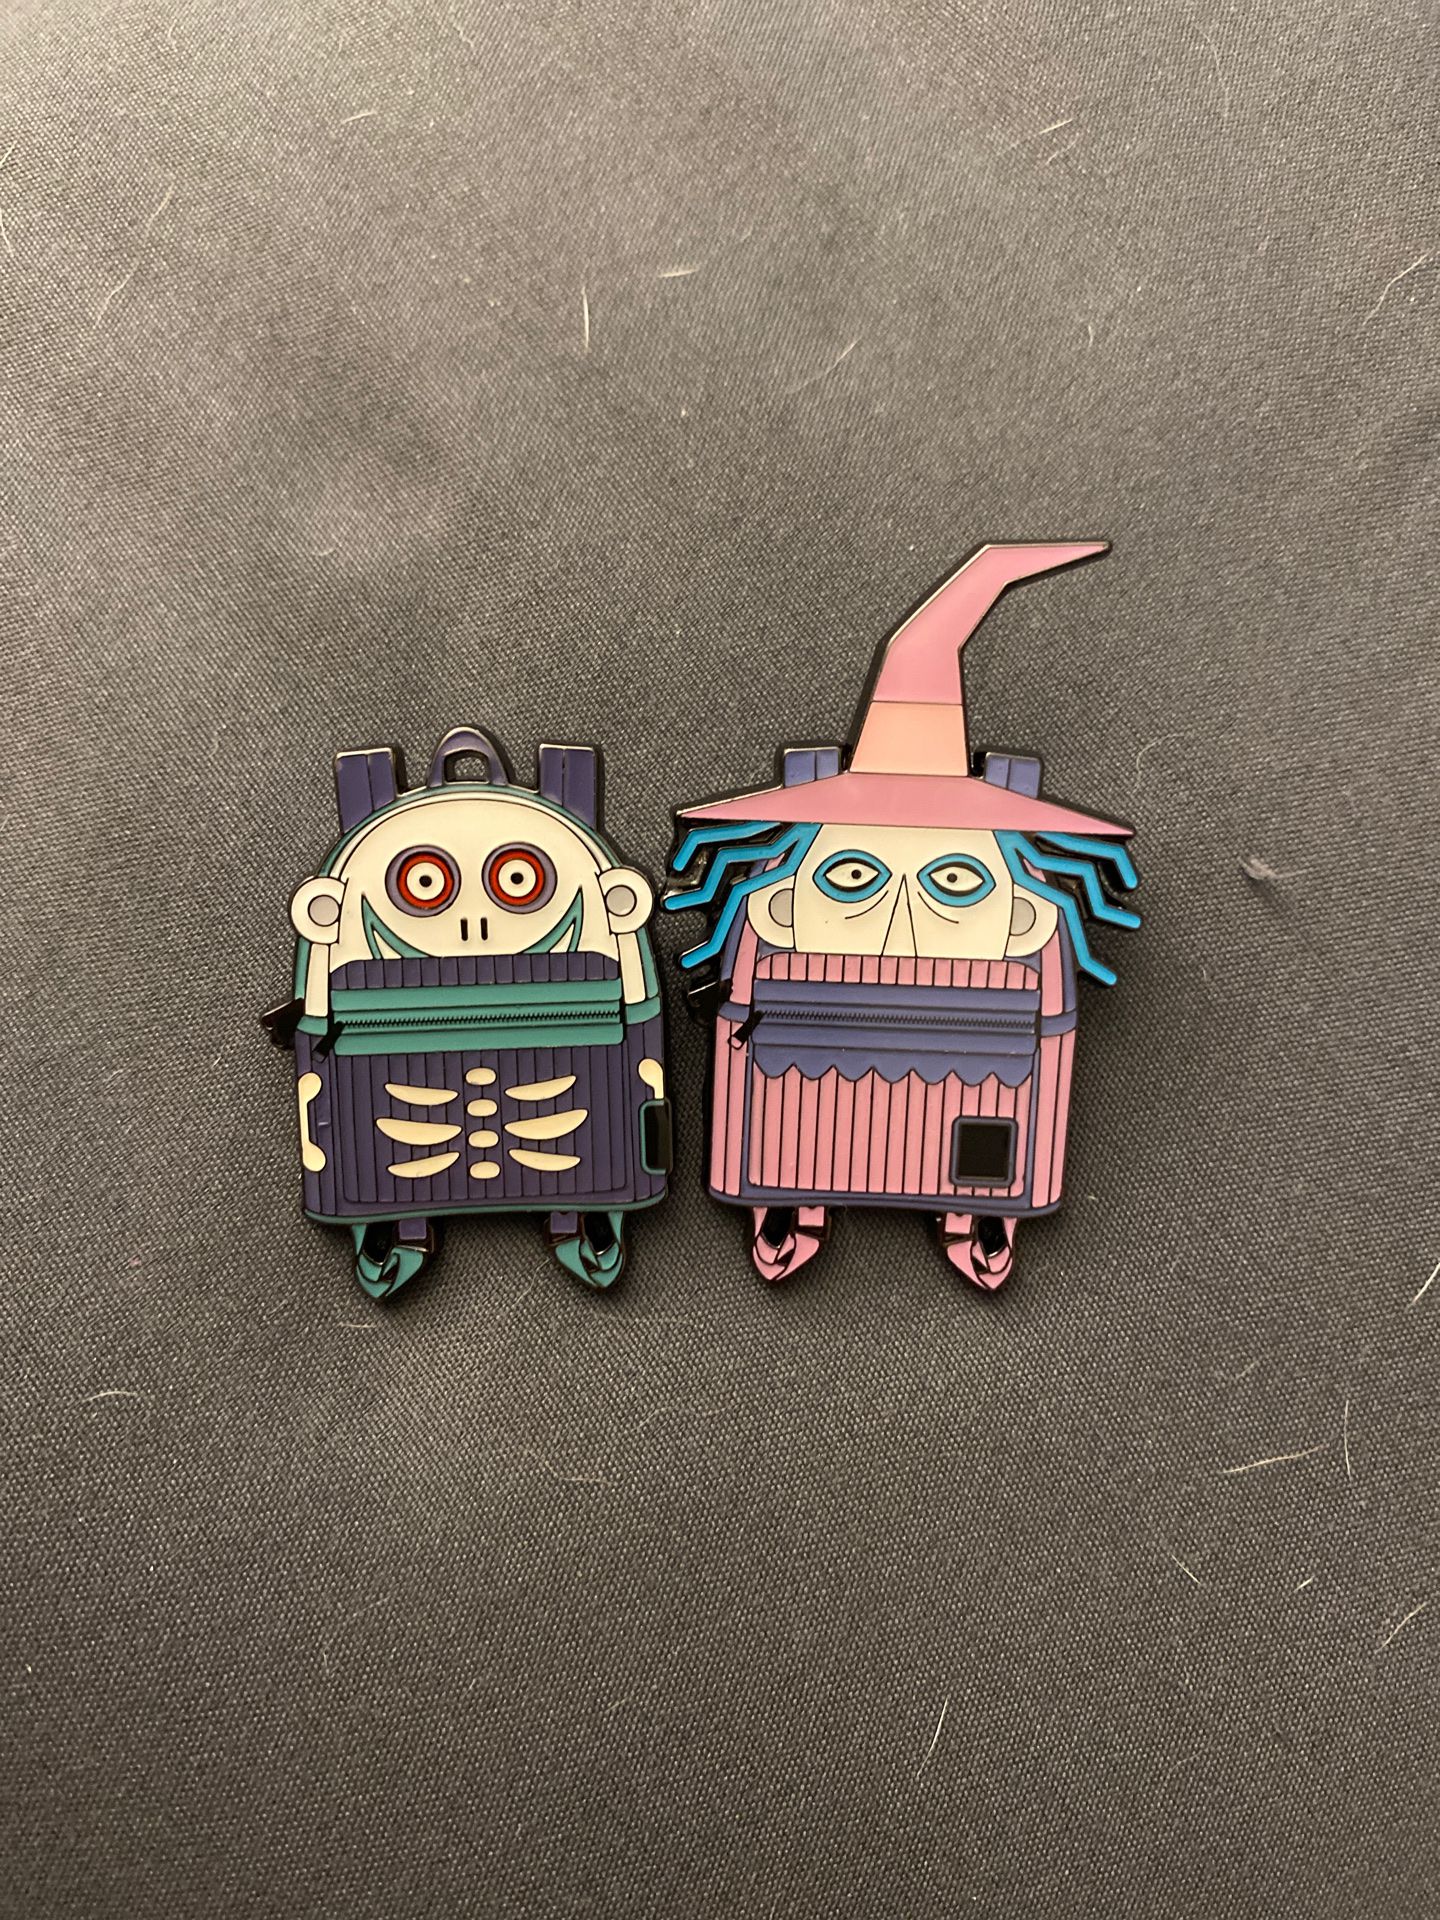 Nightmare before Christmas loungefly pins.